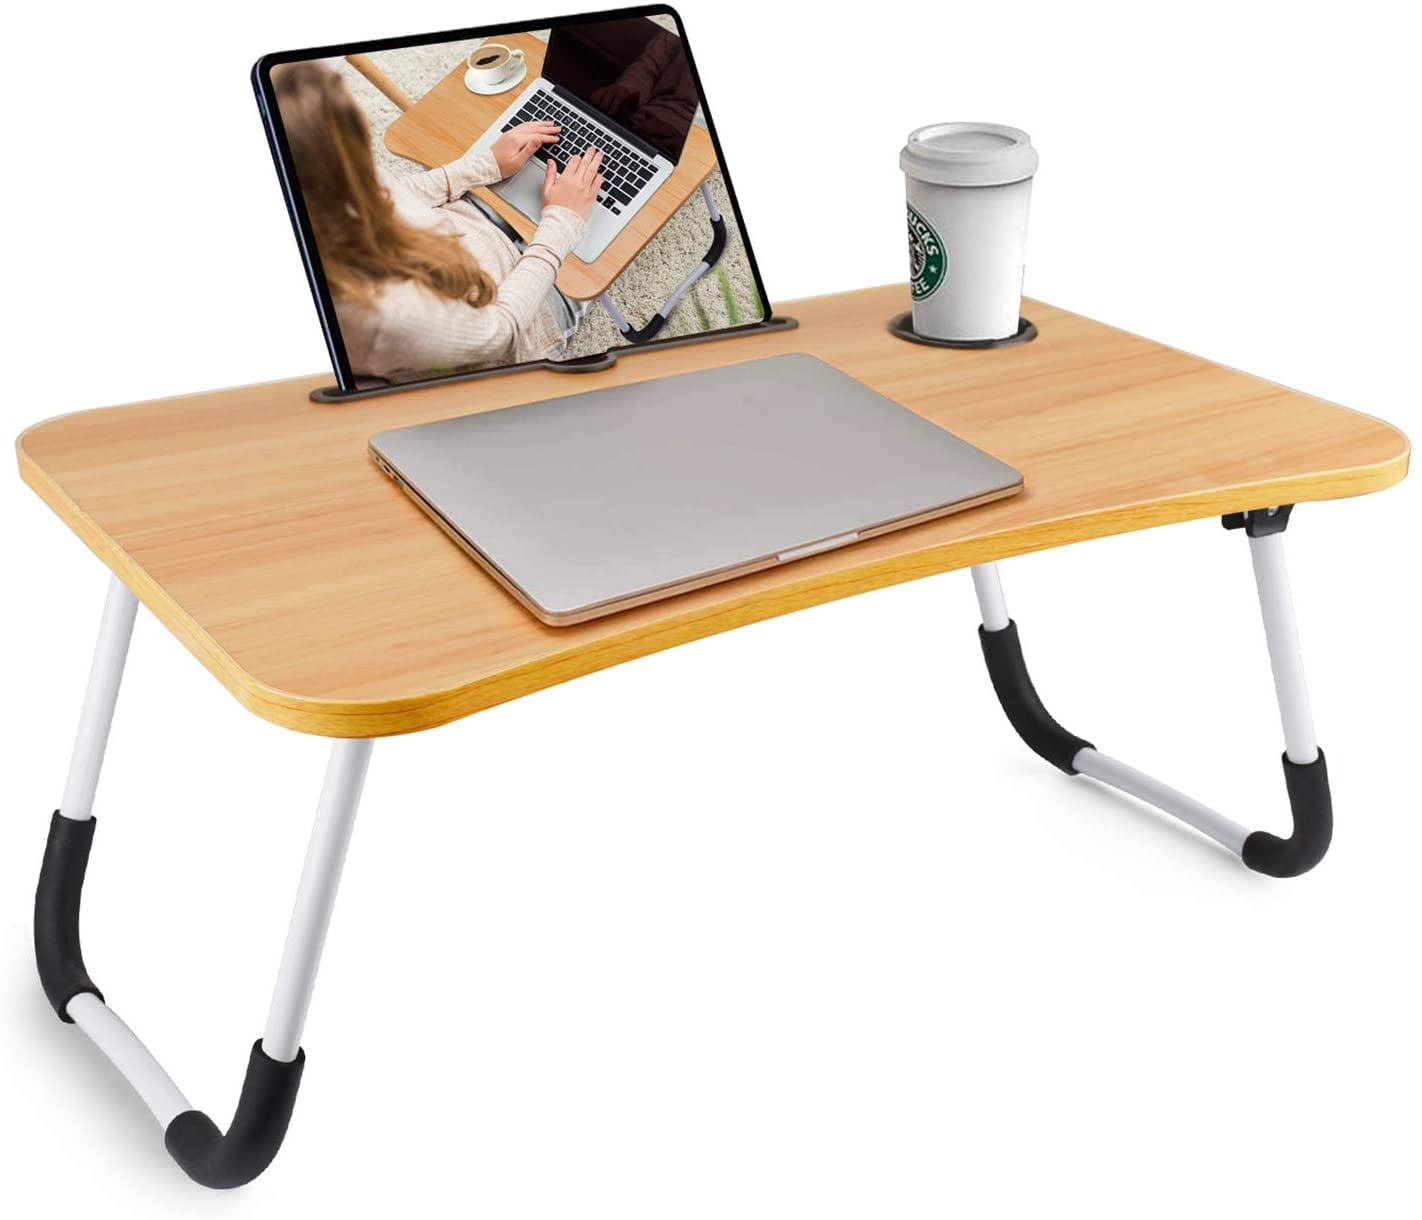 New Portable Wood Folding Desk Table For Laptop/ Breakfast Bed Serving